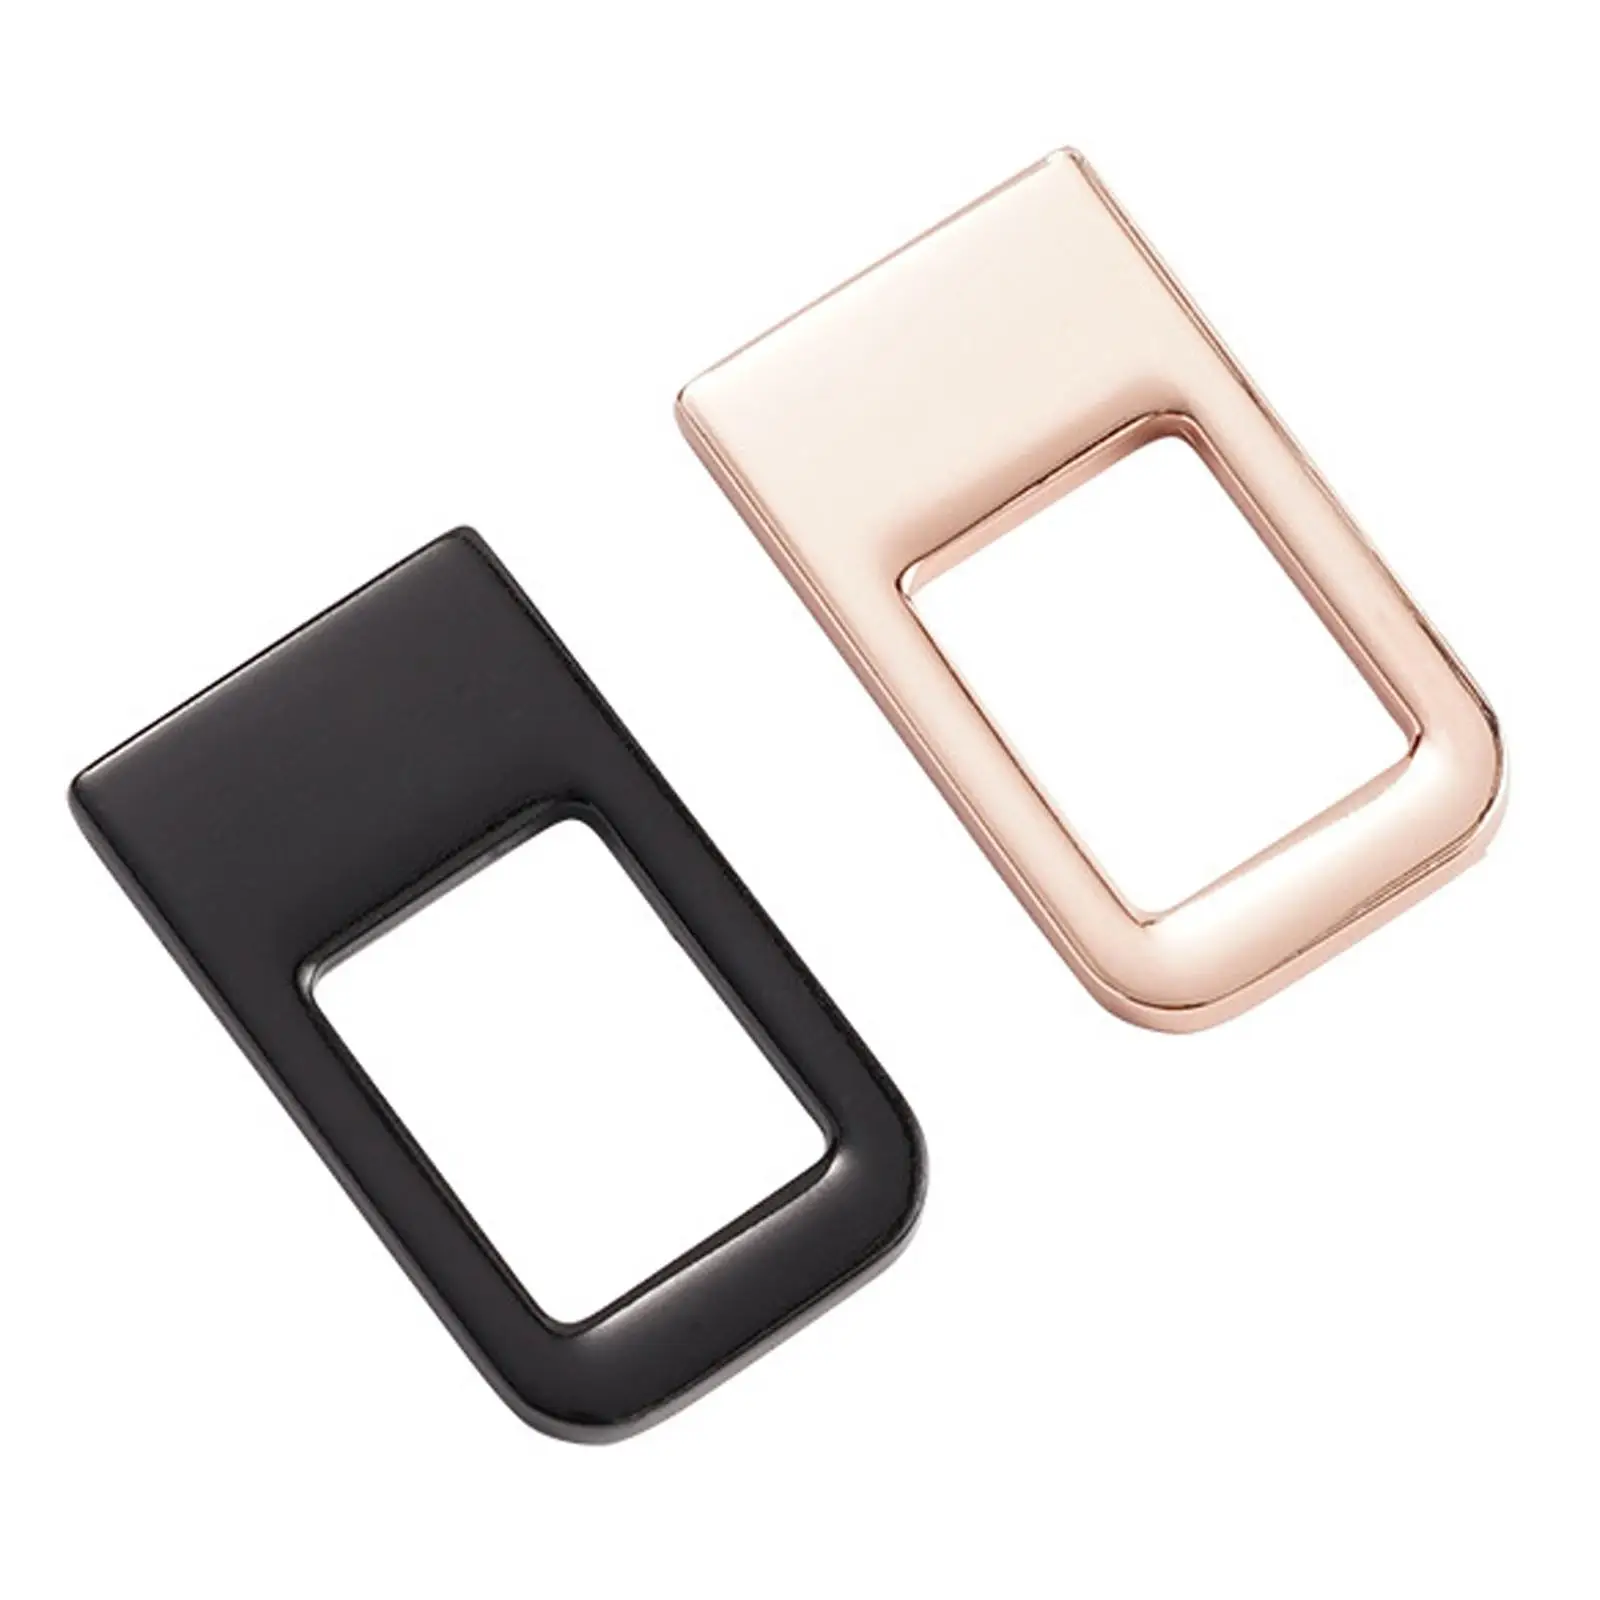 Car Safety Seat Belt Buckle Clip Spare Parts Replaces Metal Insert Card Hidden Seat Belt Buckle Clip for Byd Yuan Plus